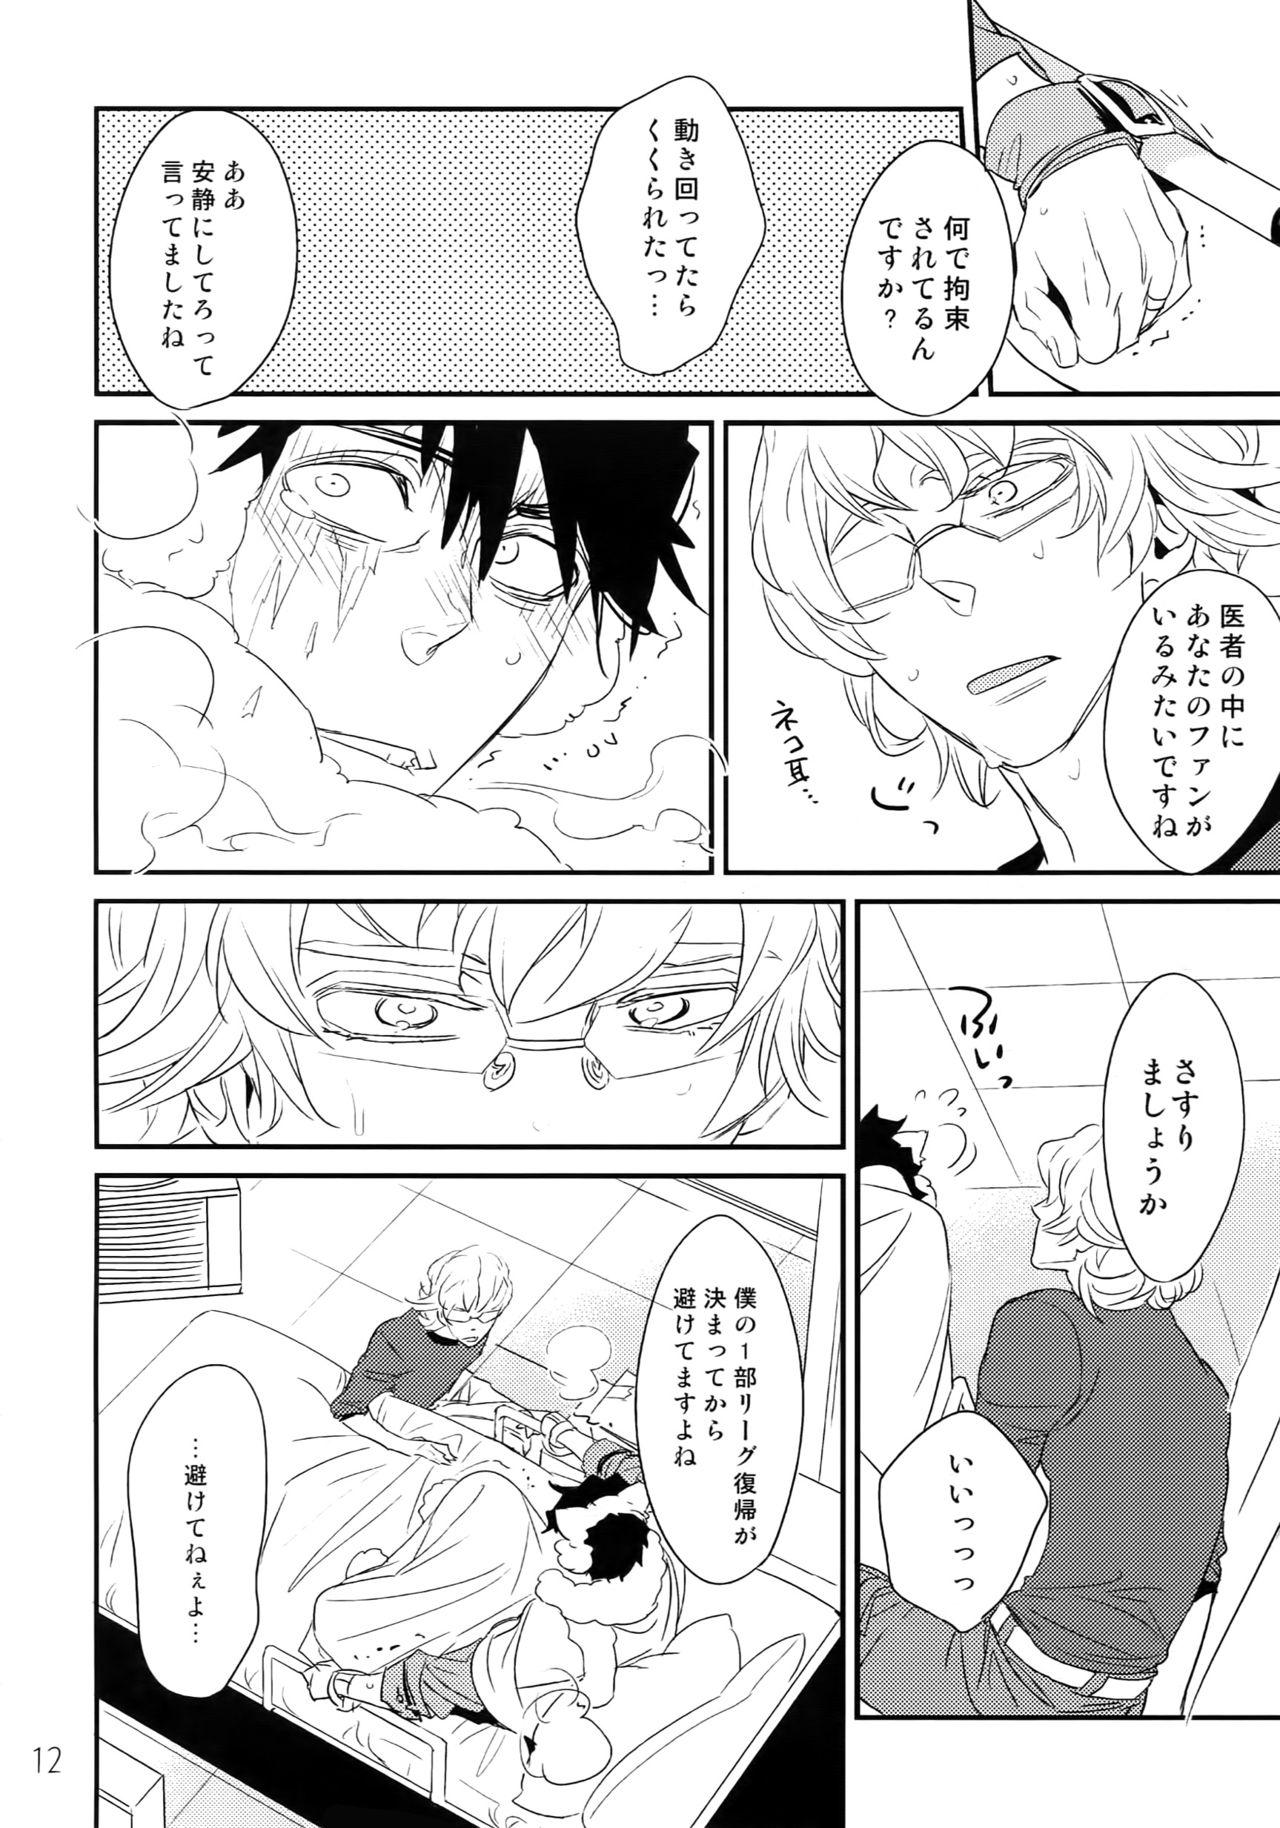 Whore T&B Re-CRUSH!3 - Tiger and bunny Amateur Xxx - Page 11